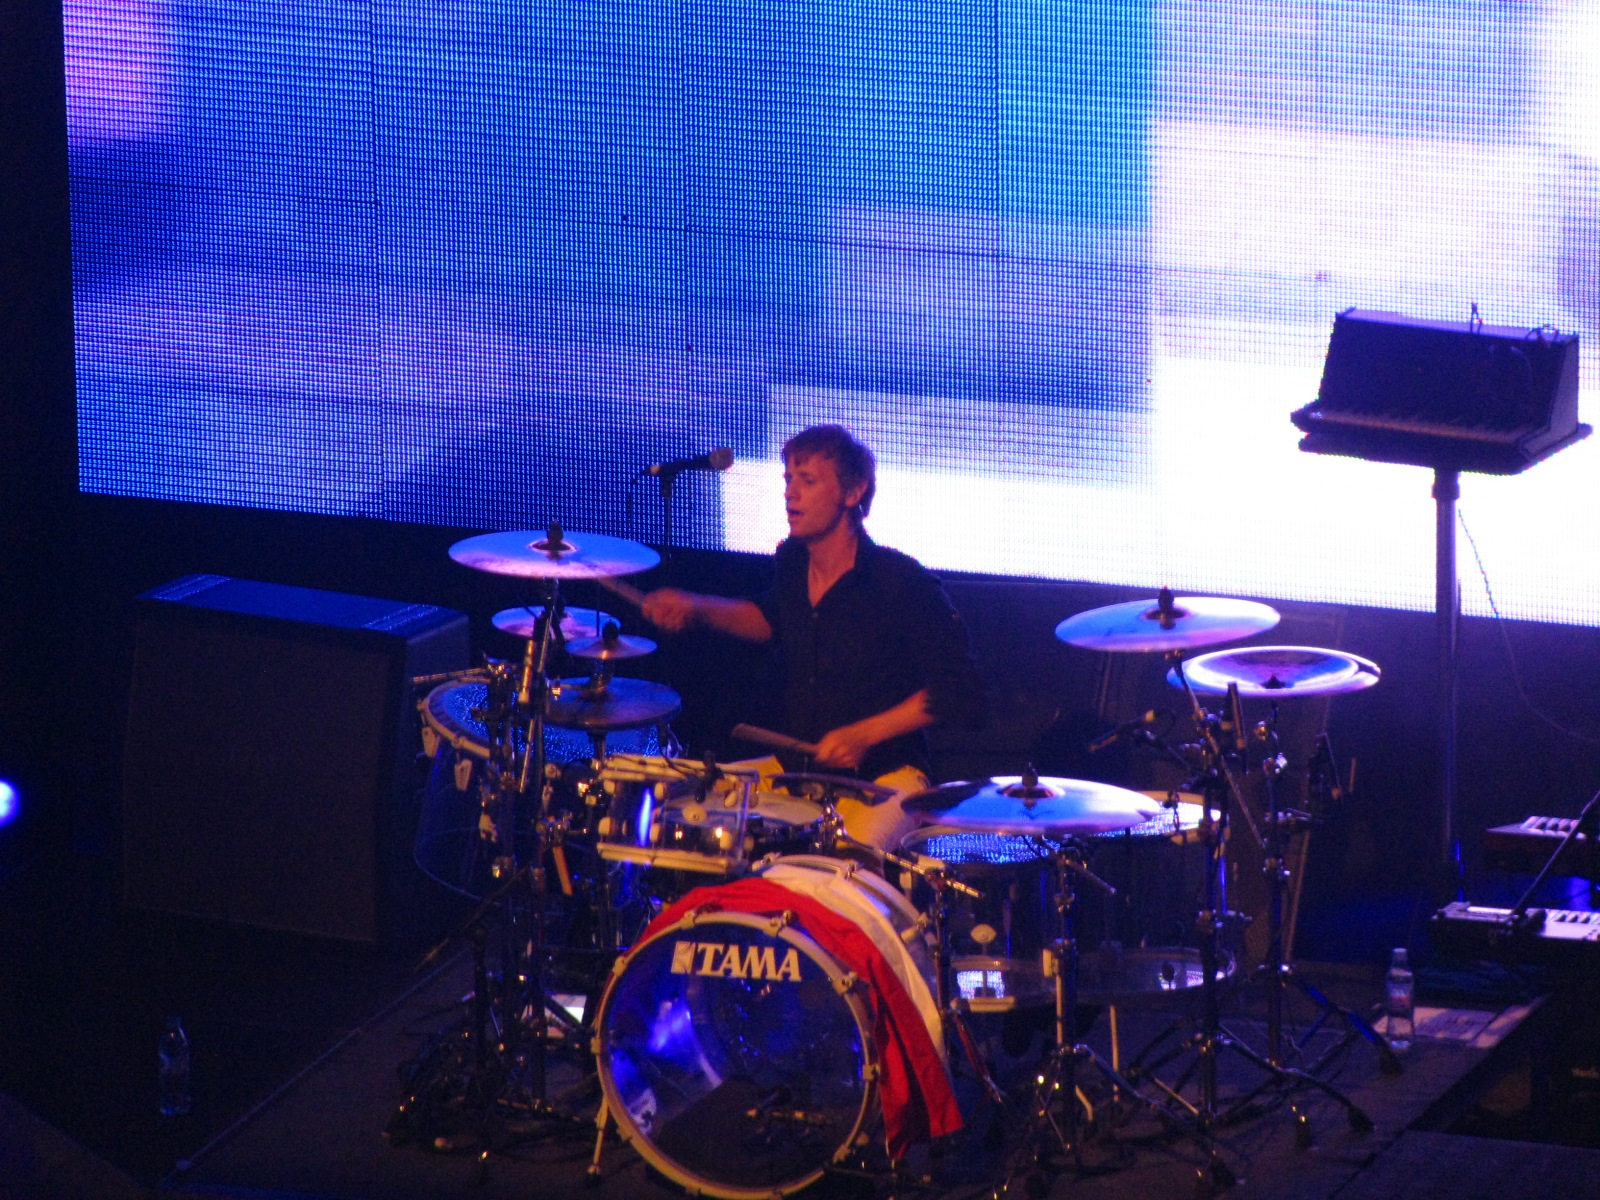 an artistic drummer plays his drums in front of a large screen